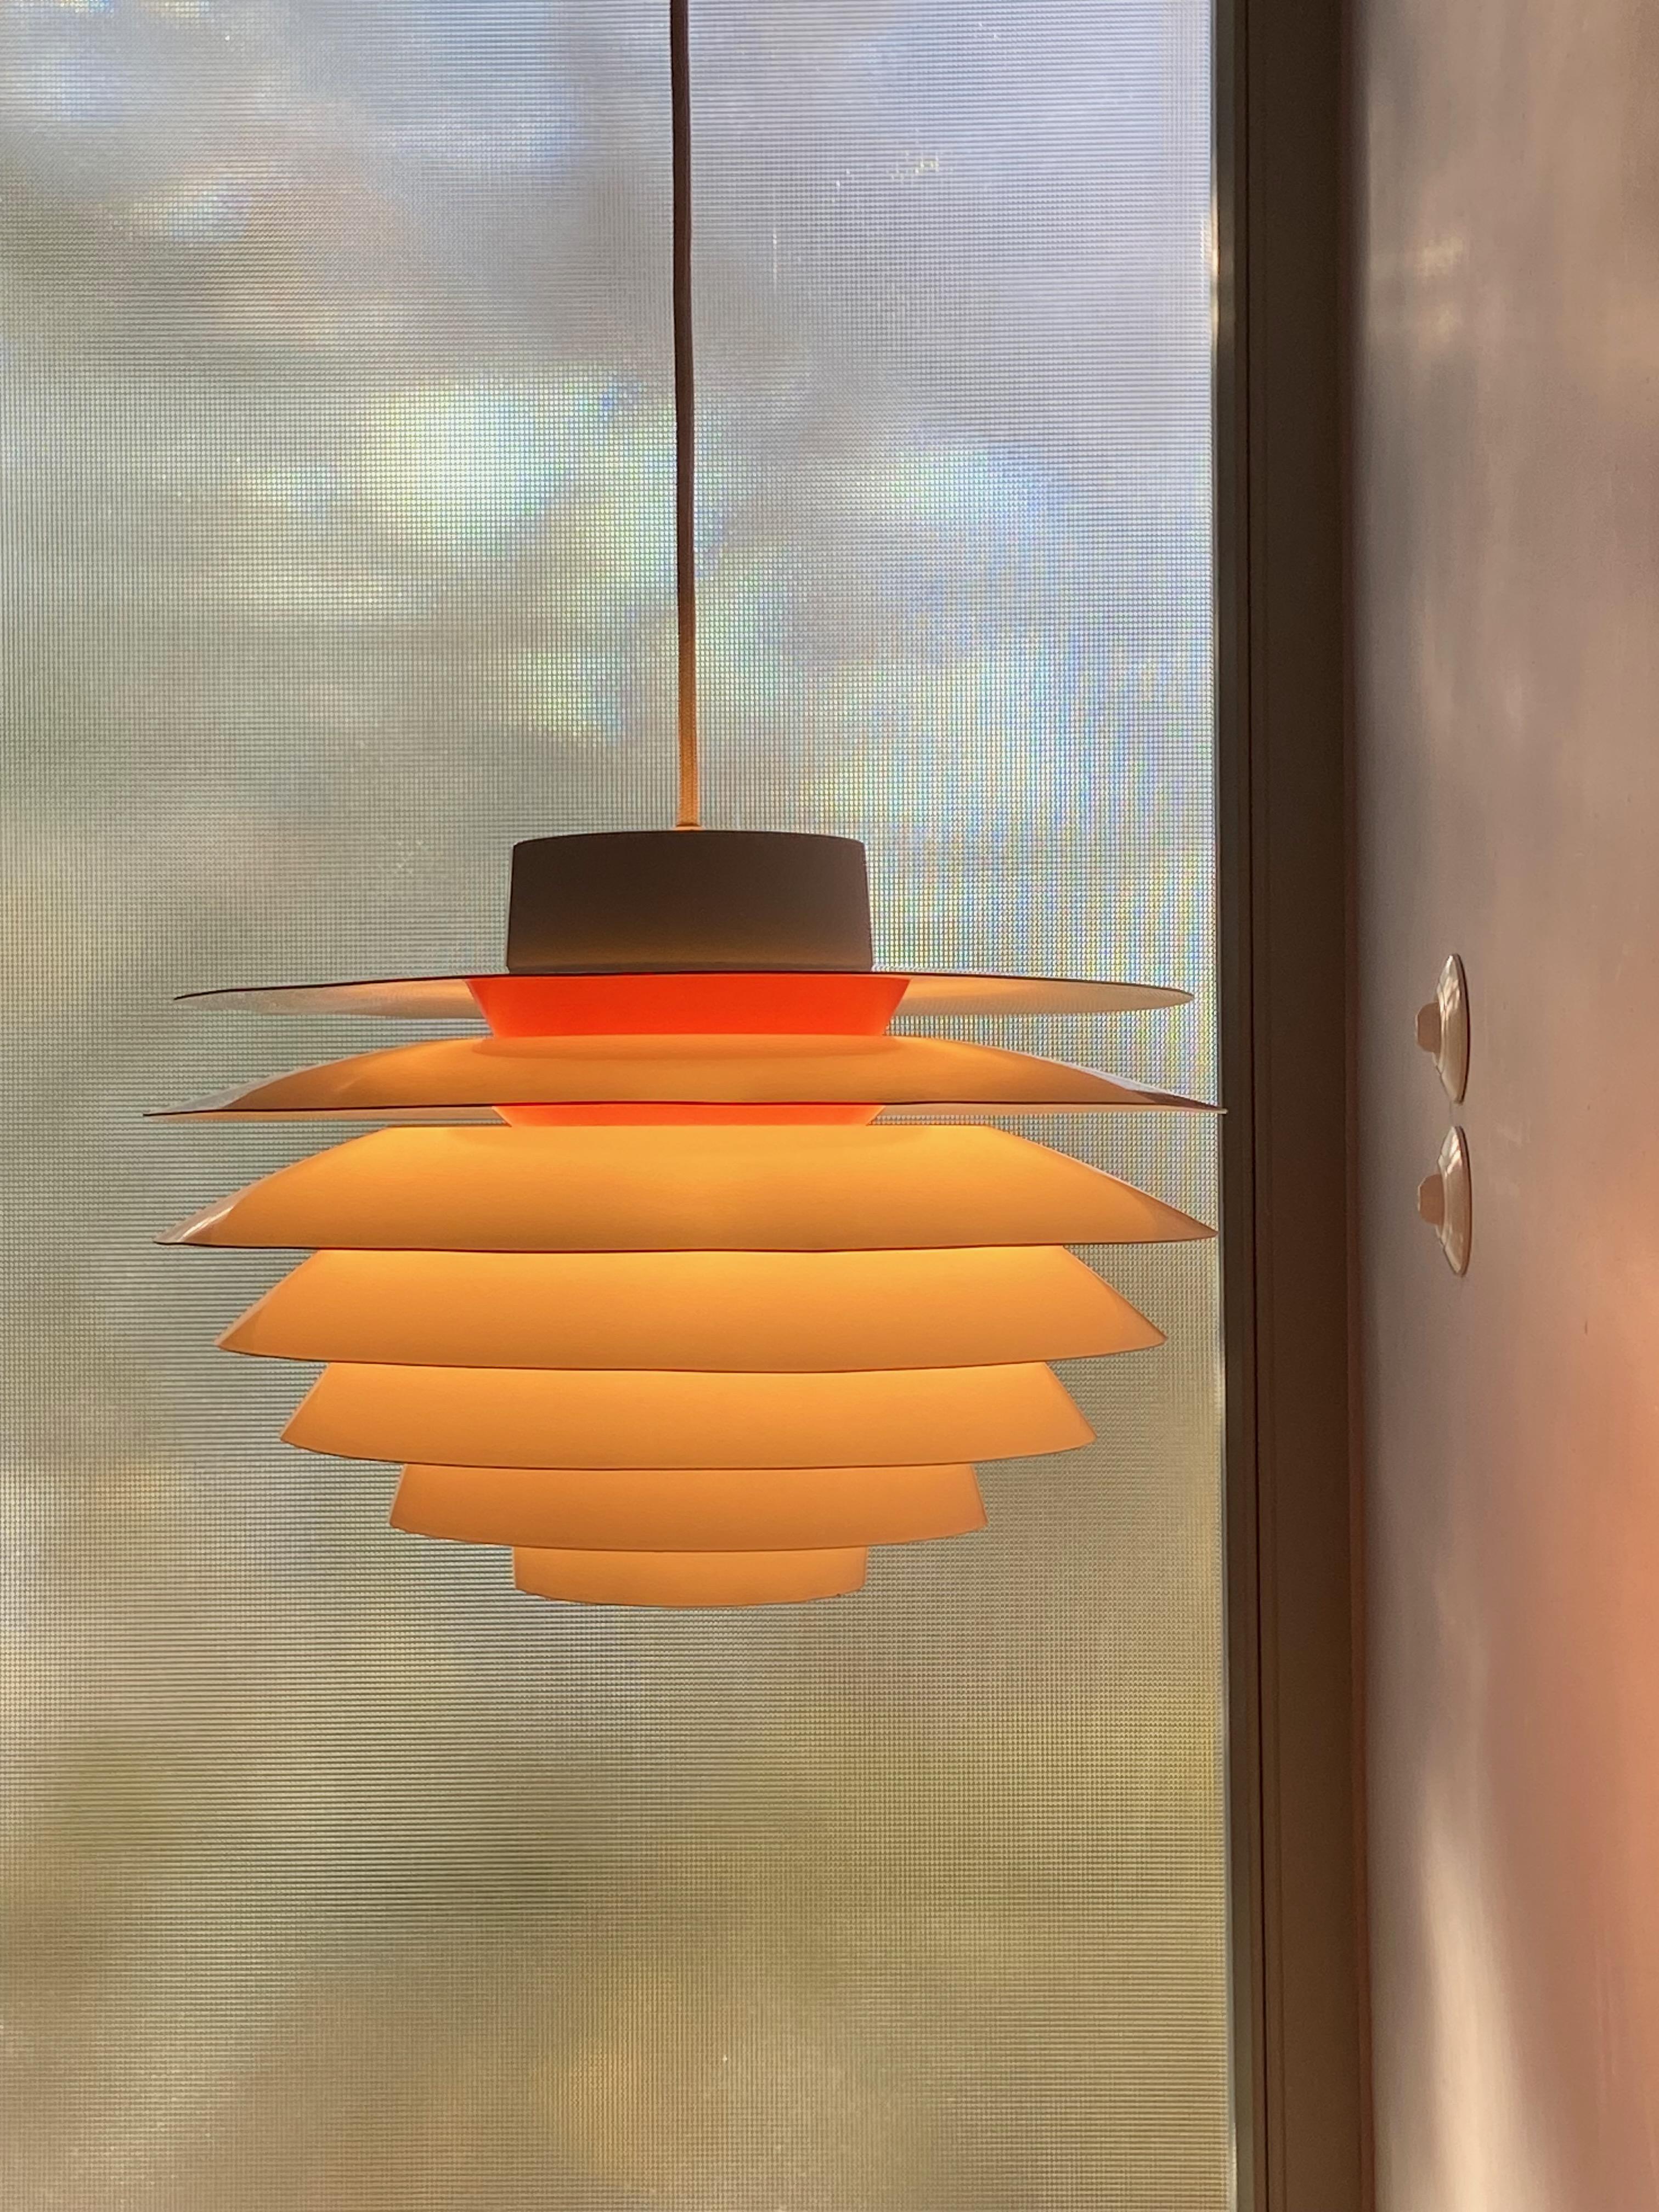 Sven Middelboe white, orange and grey colored Verona pendant light produced by Nordiskk Solar, Denmark. Good and full working condition, rewired and with E26/27 Edison porcelain socket, max. 100 watt. Ready to use with 220V or 110V. Very nice